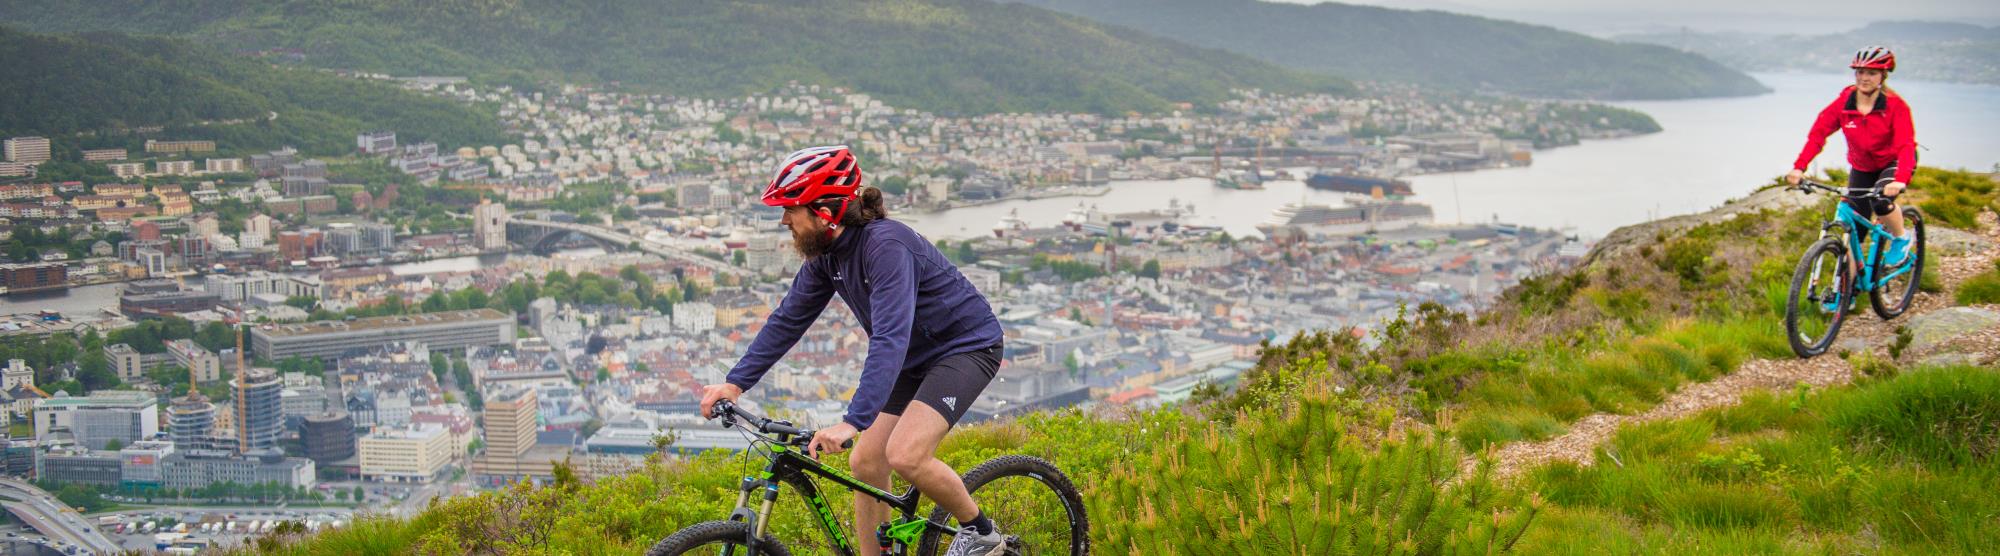 Bergen is certified as Sustainable Destination